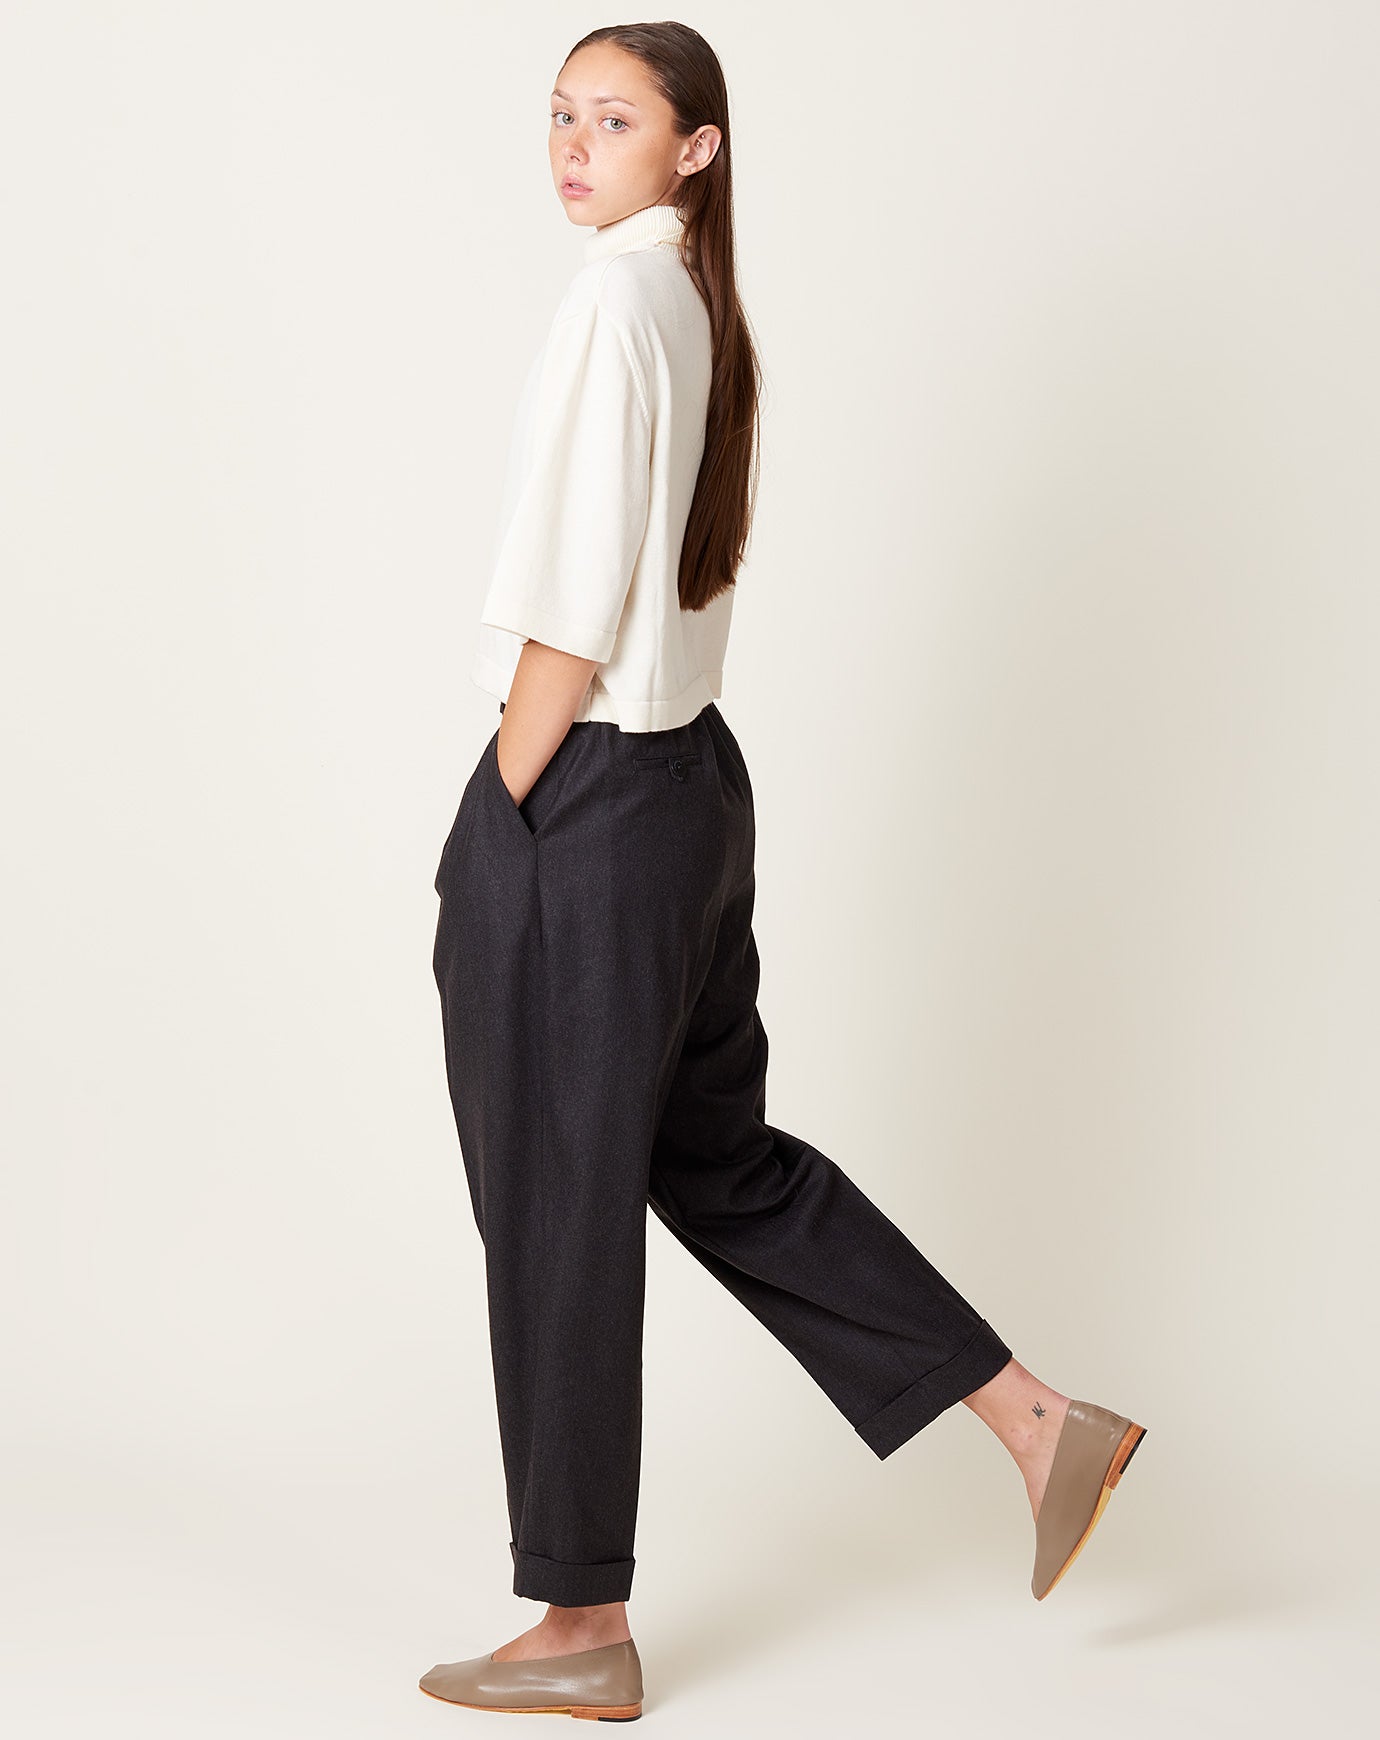 Cordera Wool Masculine Pants in Anthracite